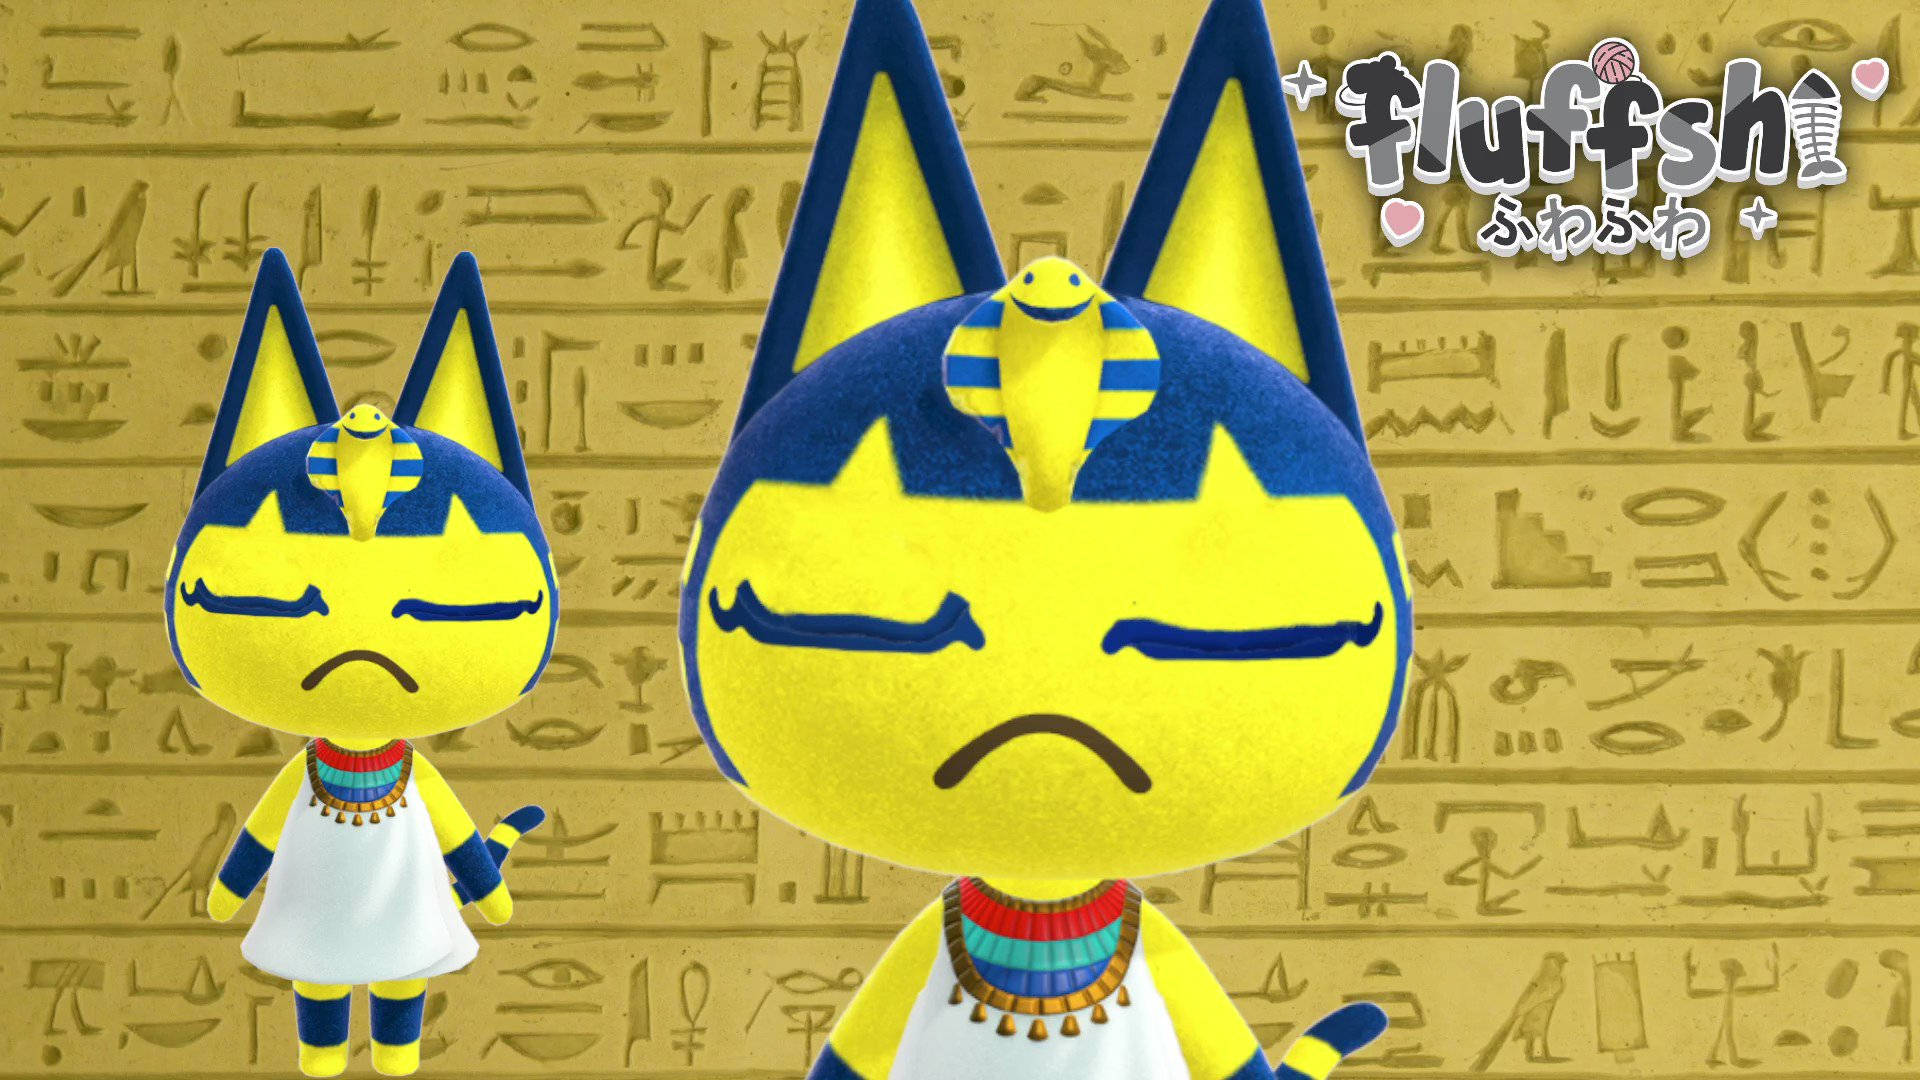 Unearthly charm of Ankha, the glamorous feline villager from Animal Crossing Wallpaper